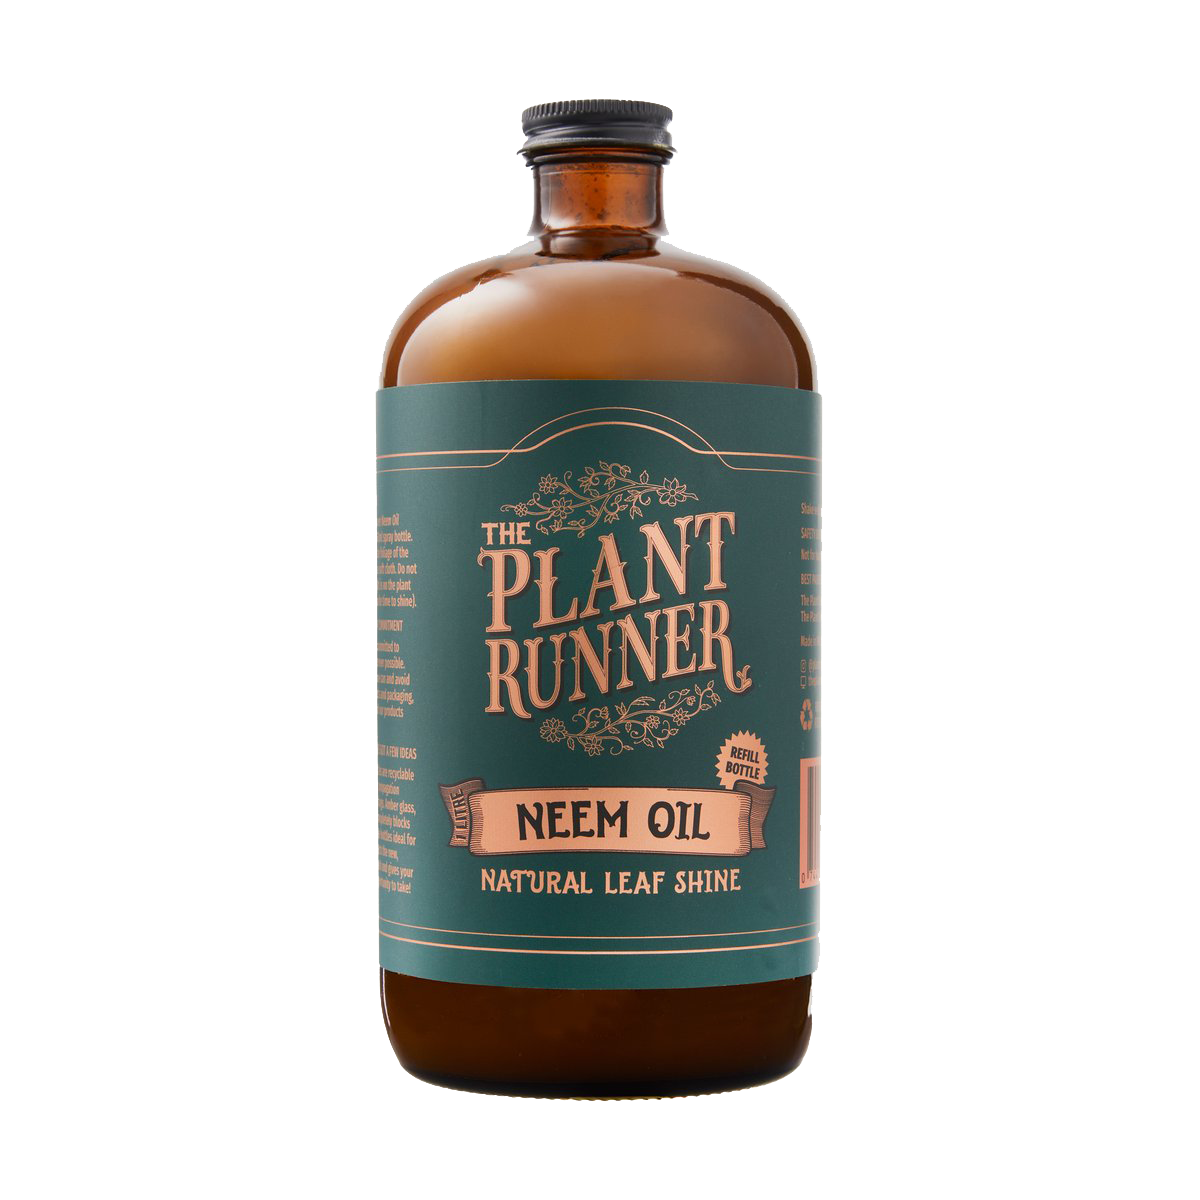 If you've loved every drop of The Plant Runner's 250ml Neem Oil, level up with up with this 1L big-cat refill.